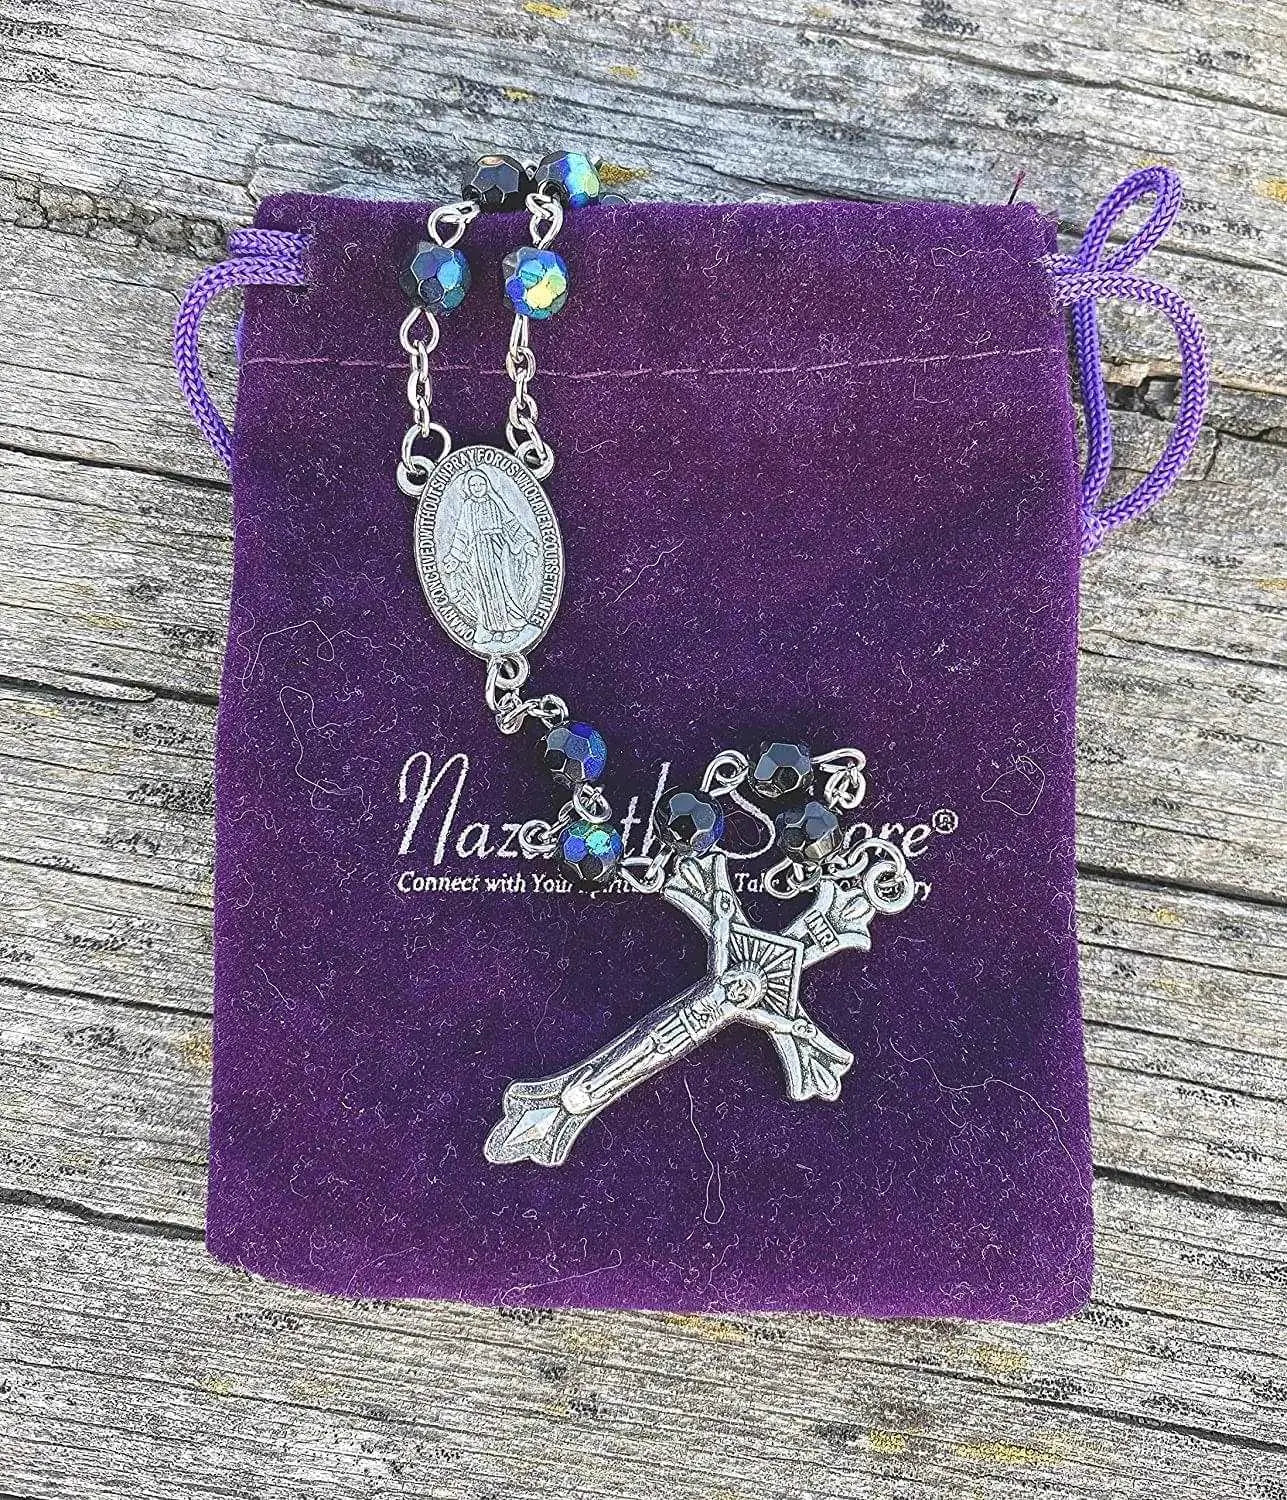 Catholic Rosary Necklace Black Blue Crystal Beads Miraculous Medal Nazareth Store